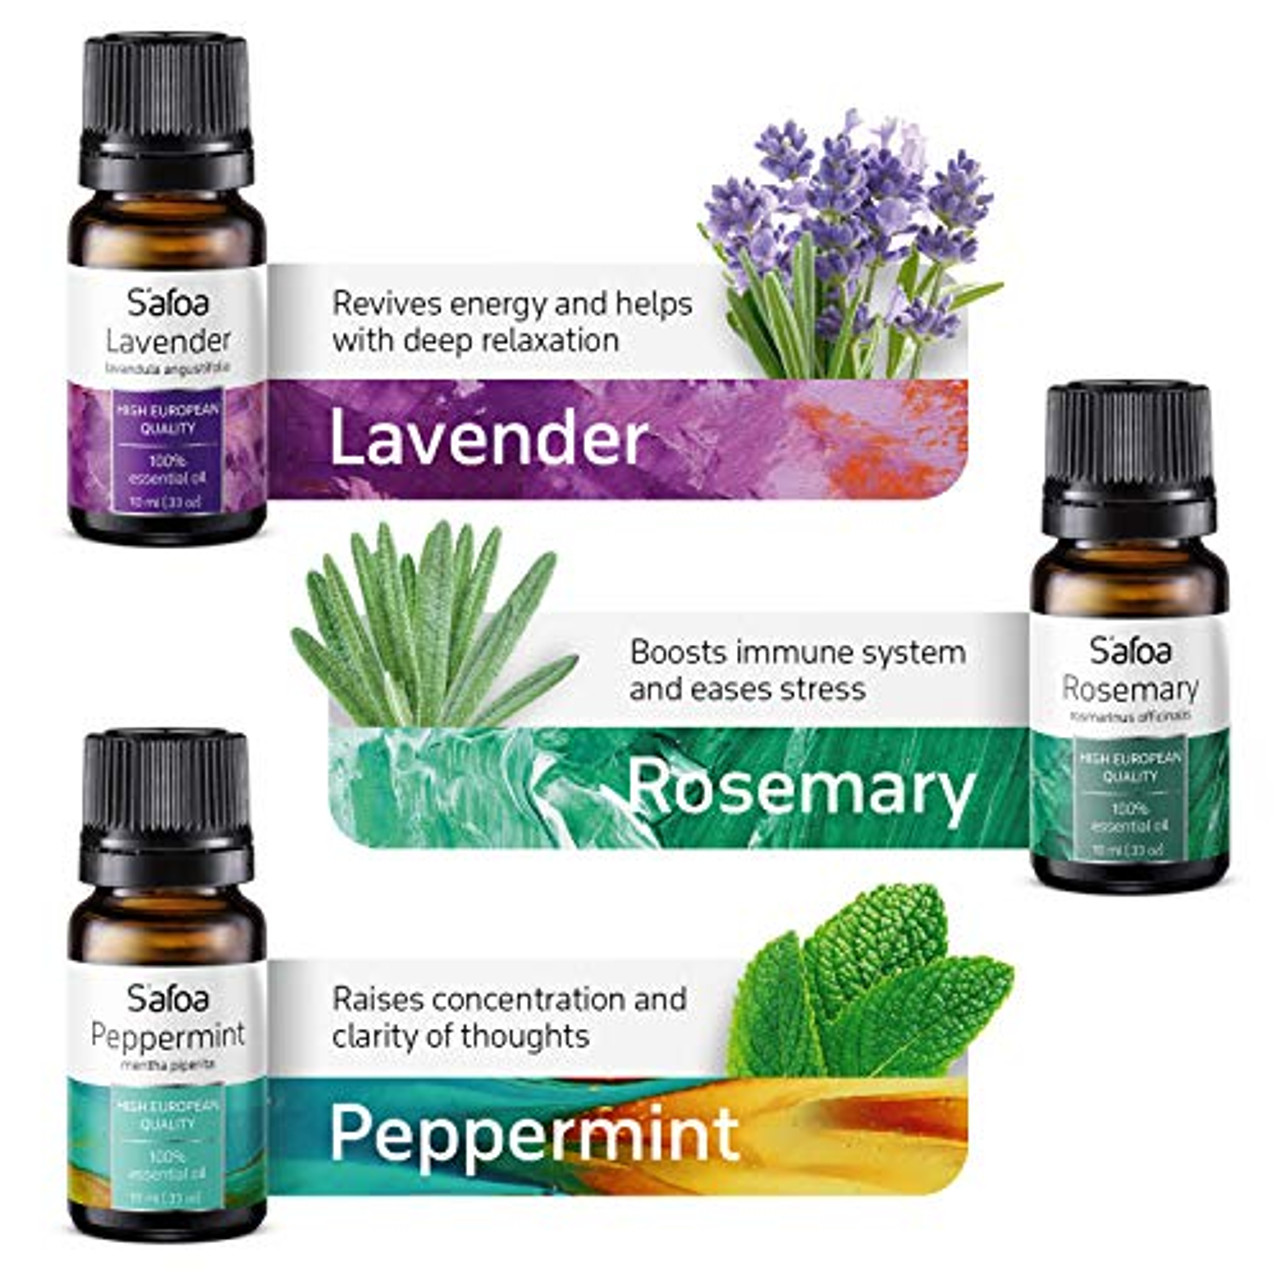 Essential Oils for Diffusers for Home - Set of 6 - Tea Tree, Rosemary,  Lavender, Peppermint, Orange, Eucalyptus 